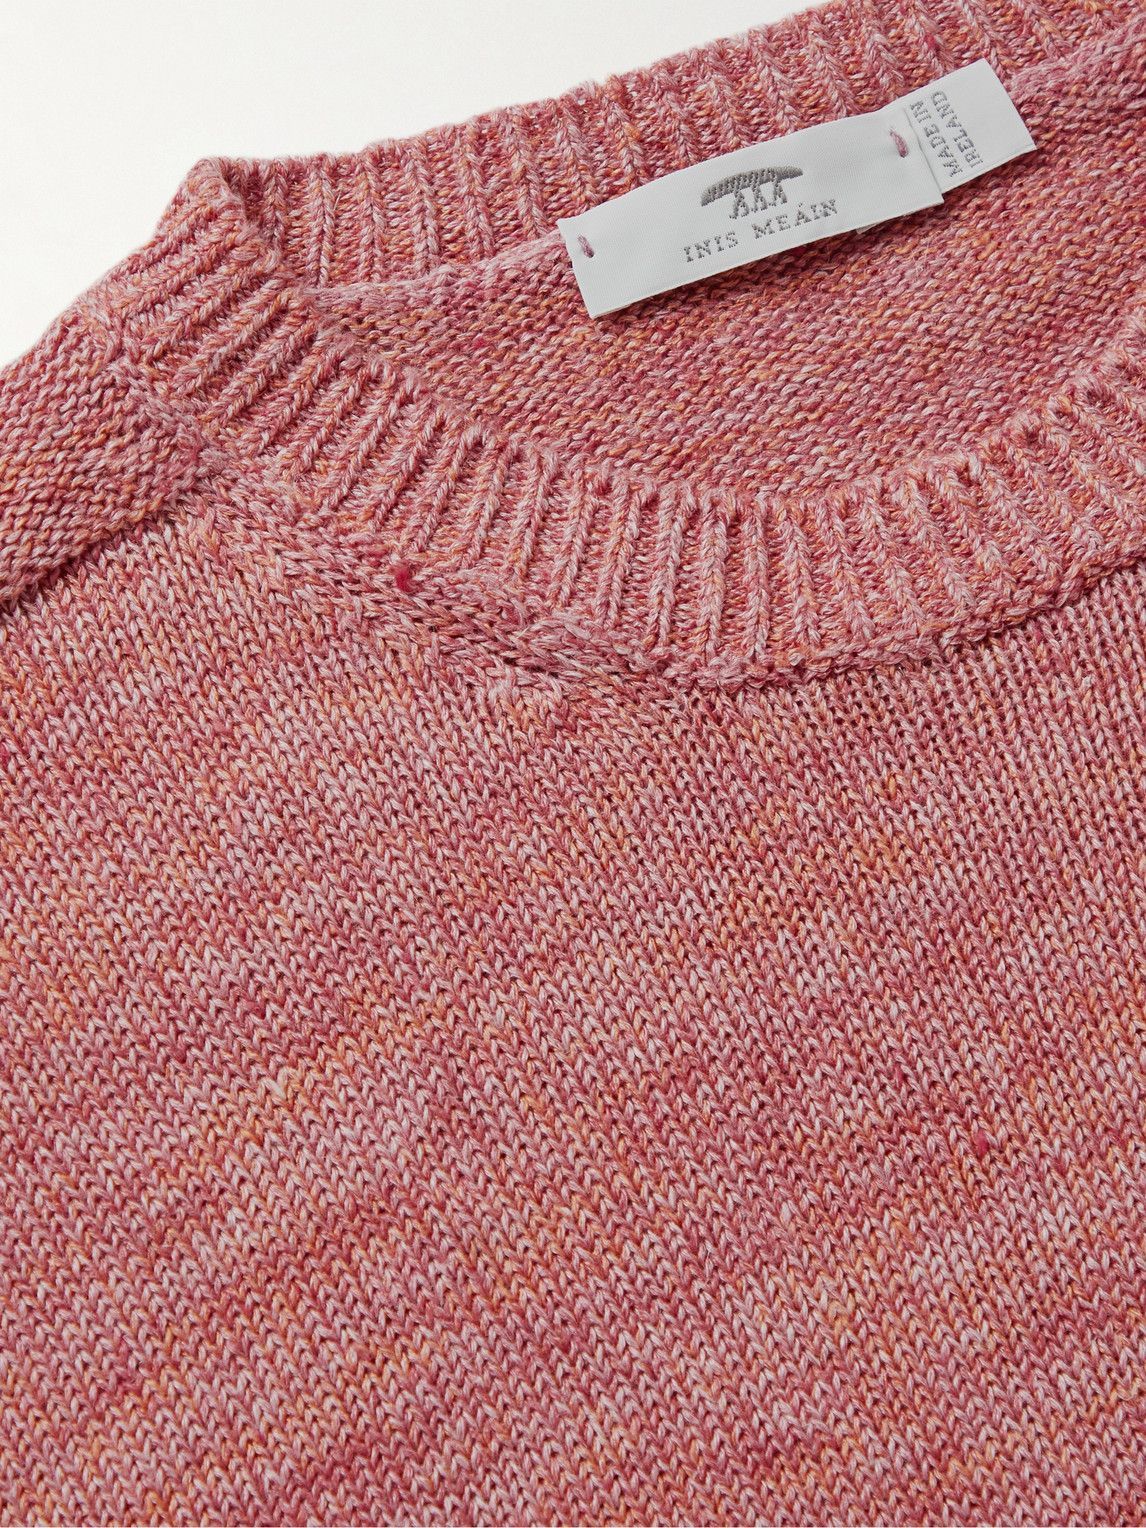 Inis Meáin - Donegal Linen Sweater - Red Inis Meáin